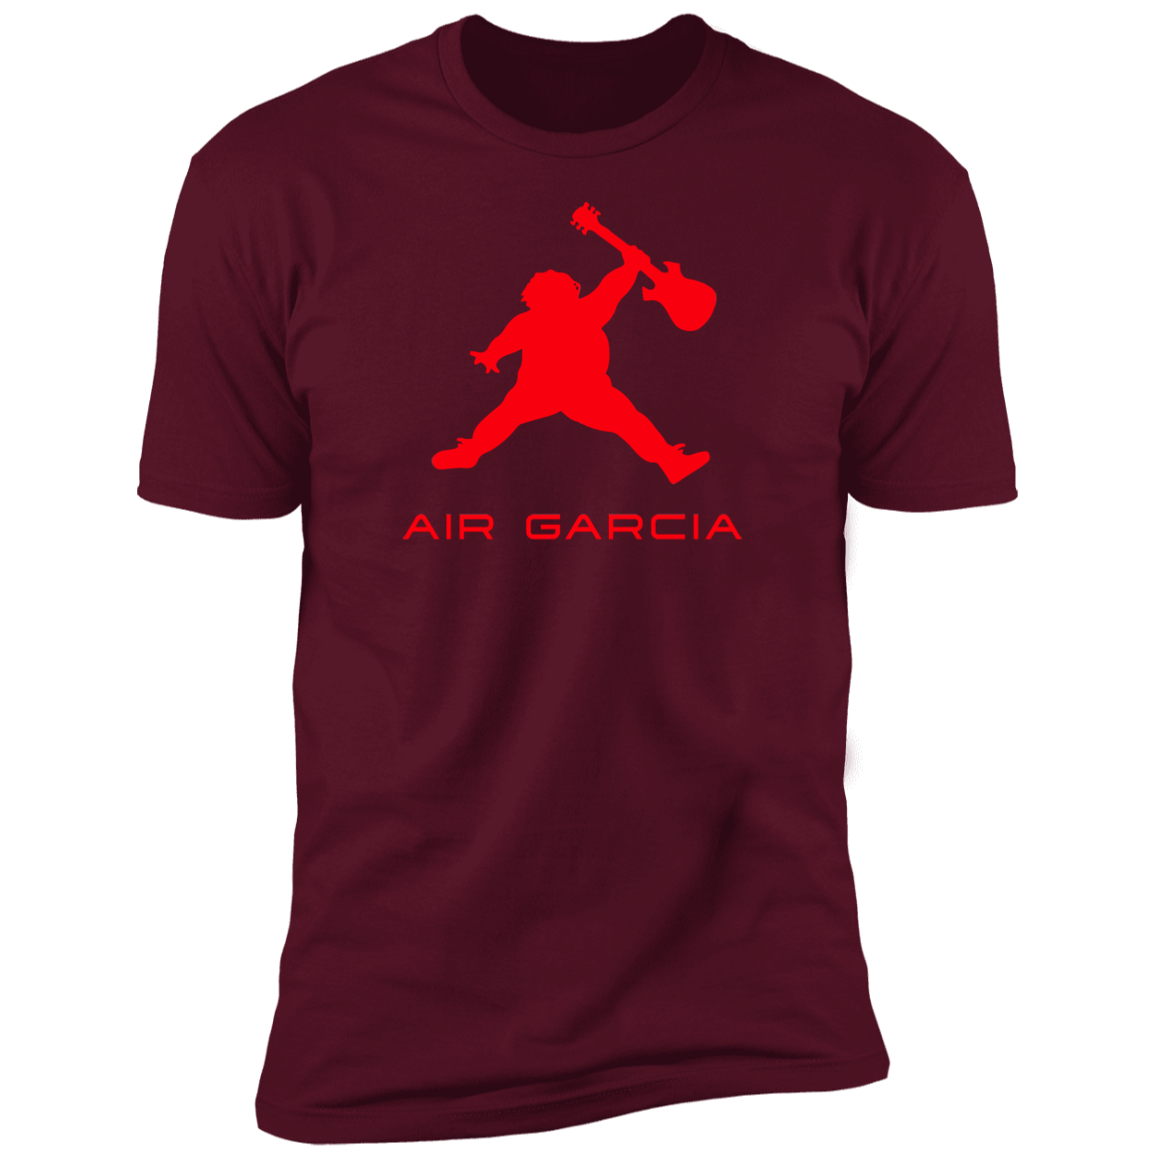 Air Garcia, The Grateful inspired T-shirt – The TRAP KIT